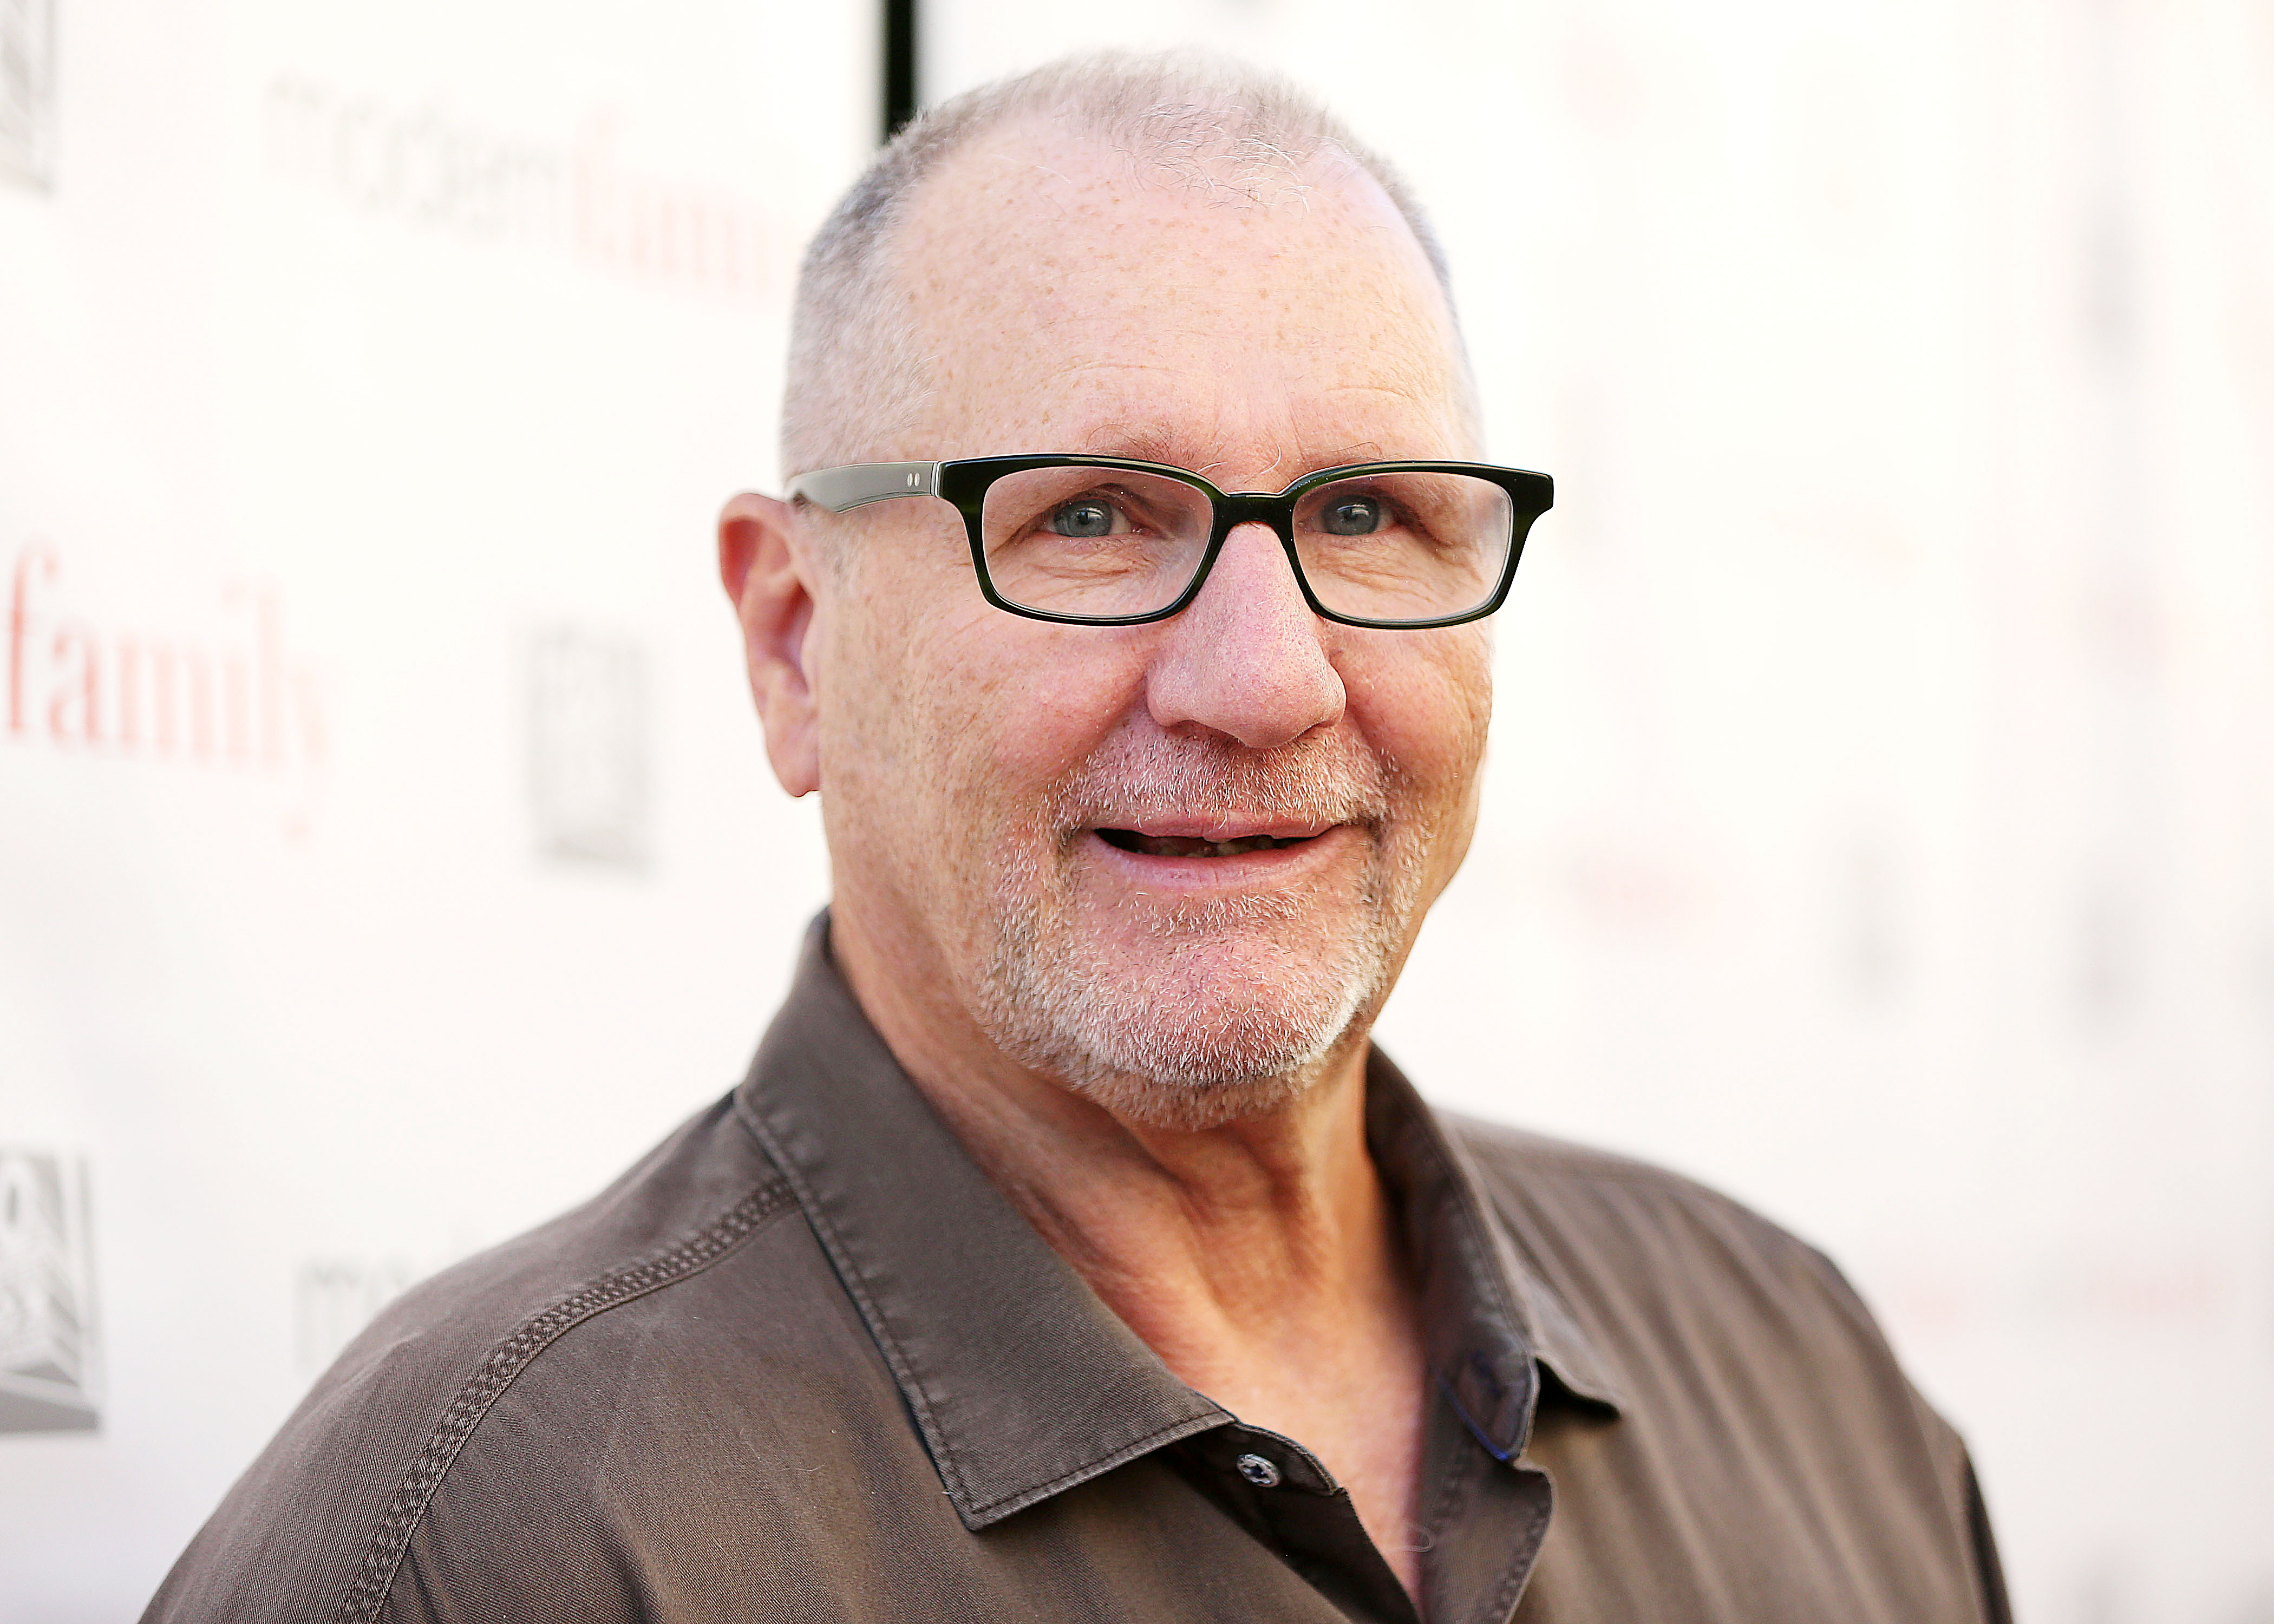 Ed O'Neill: 25 Things You Don't Know About Me